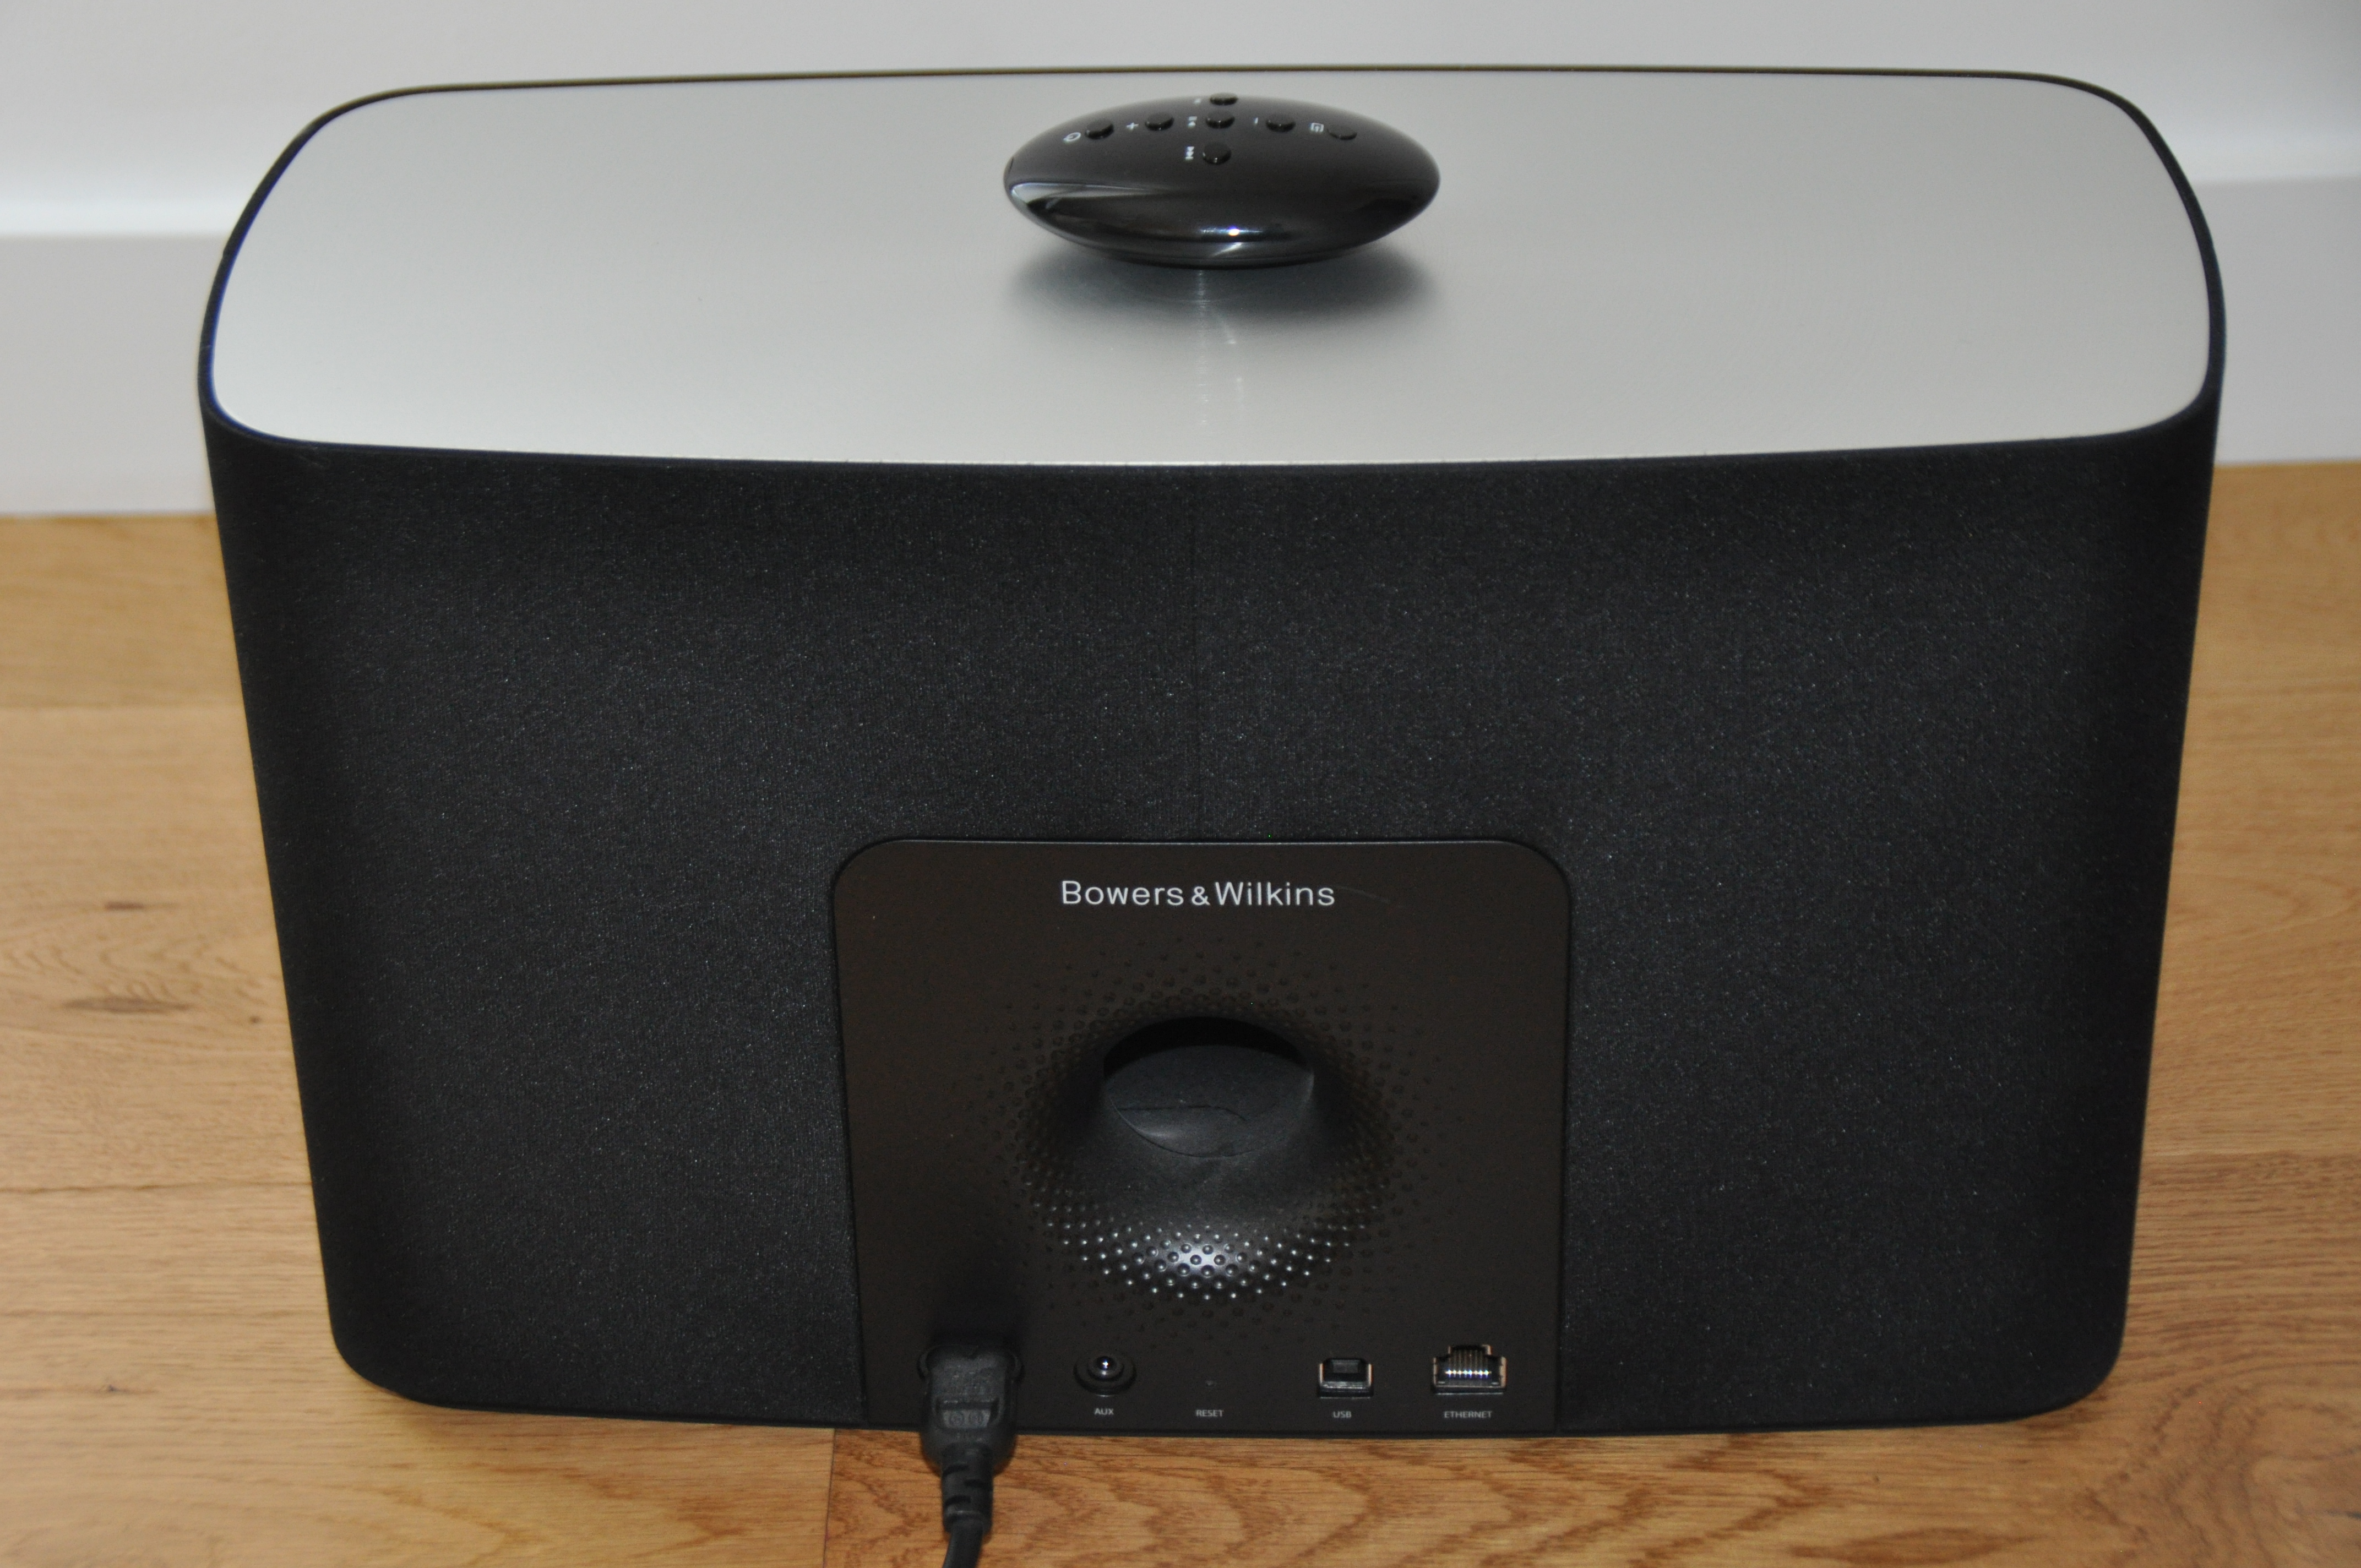 bowers & wilkins a7 price